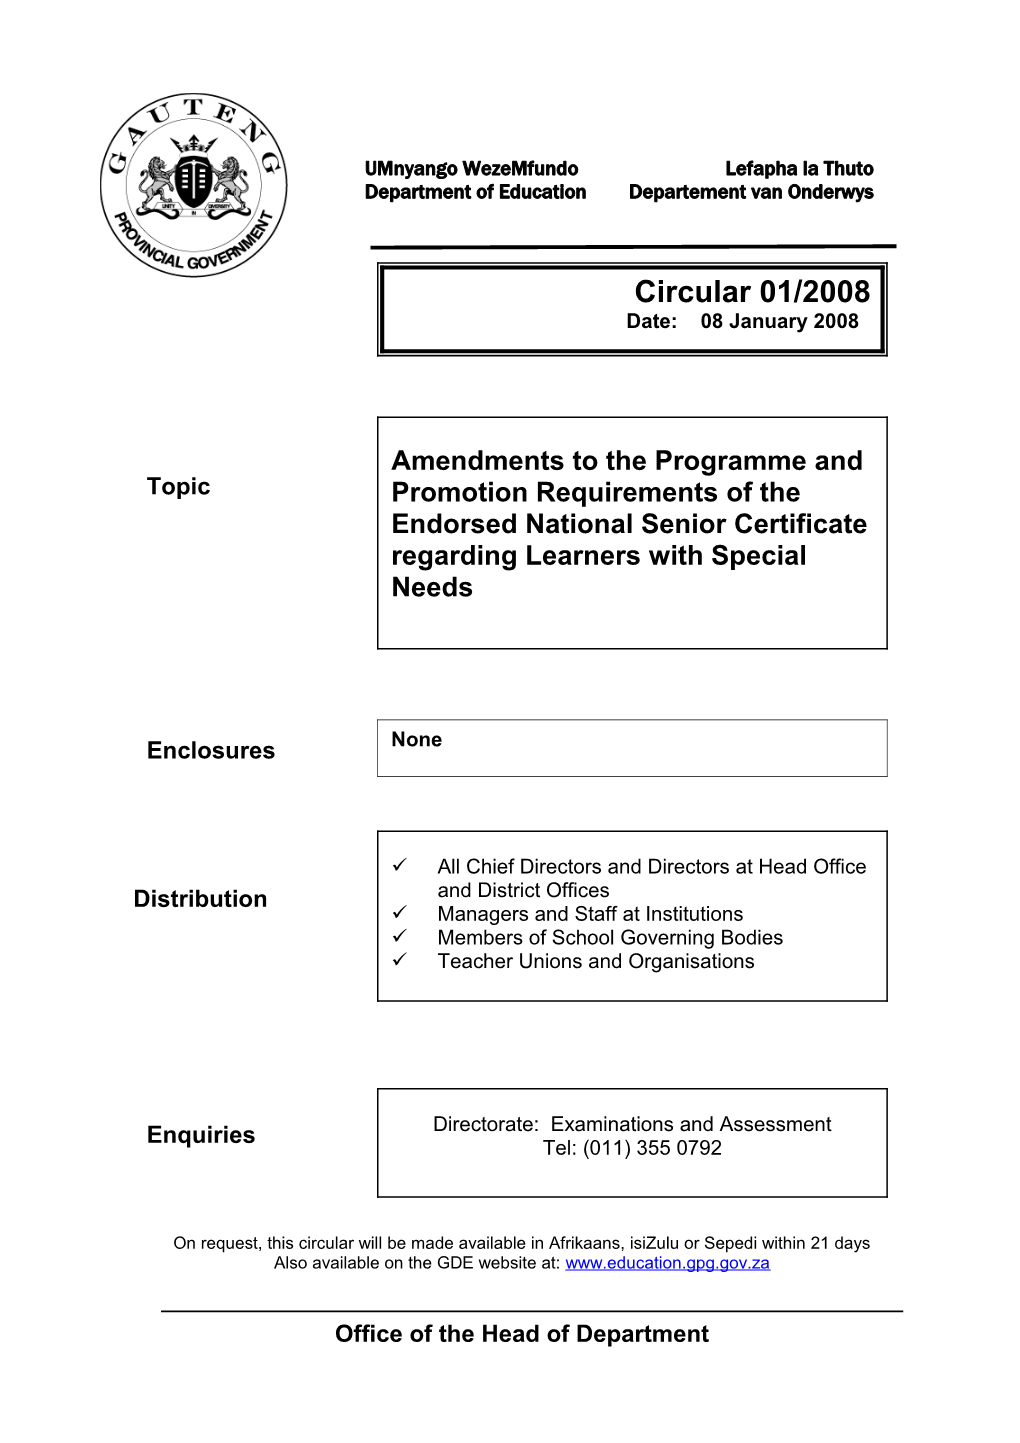 Amendments to the Programme and Promotion Circ 01/2008 Requirements of the Endorsed National